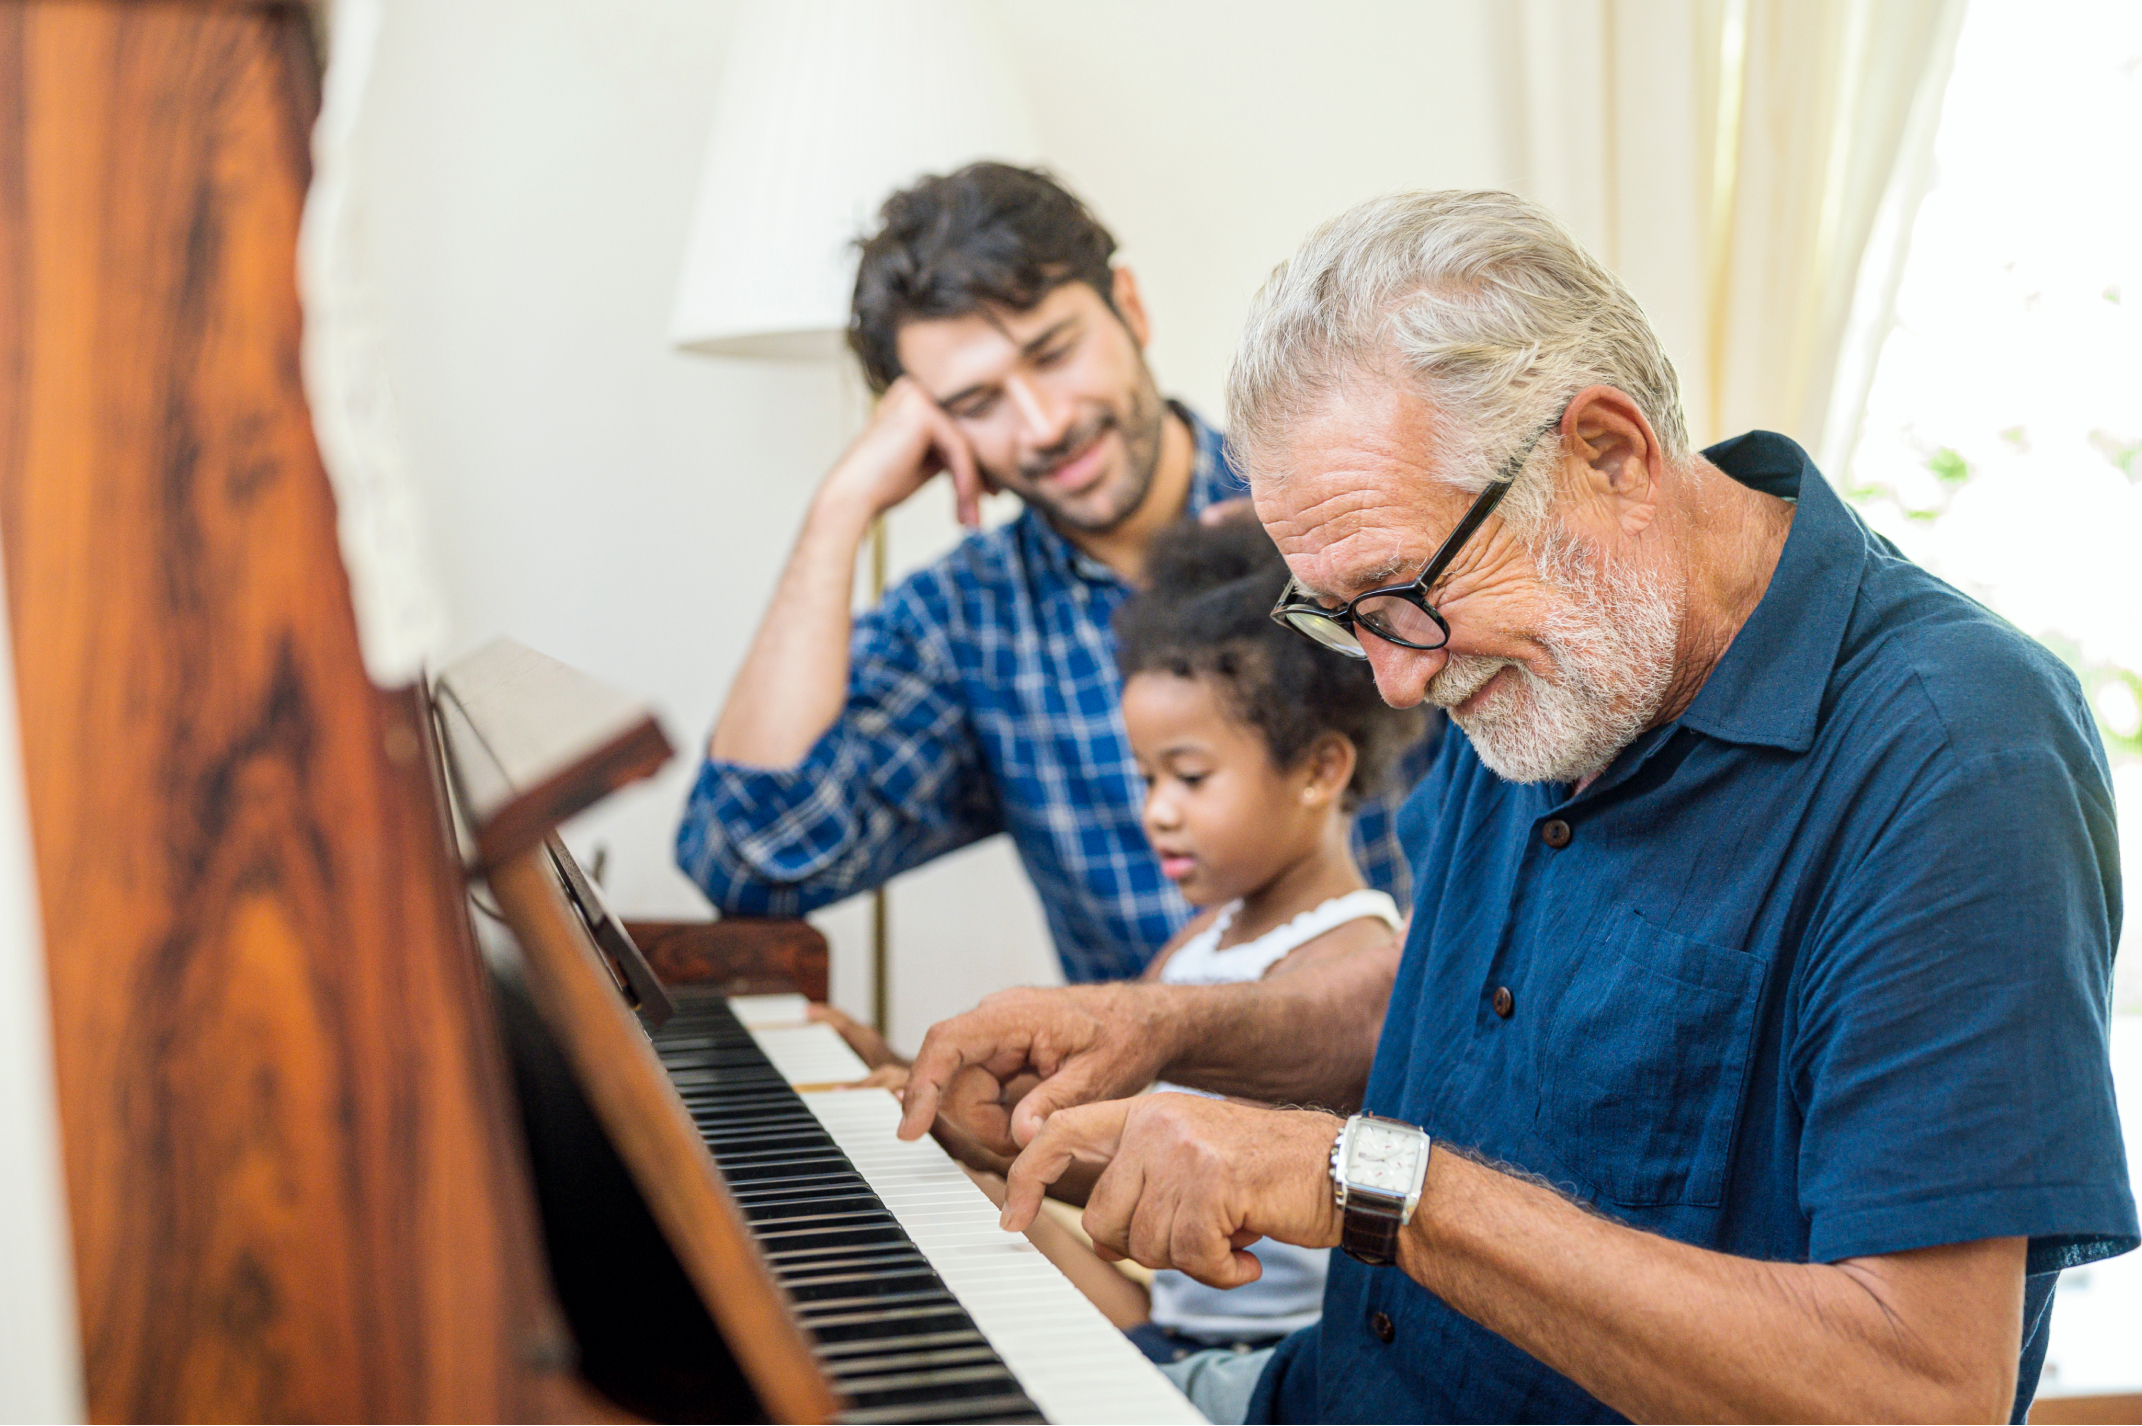 Smiling 55+ man with a child and a younger man at a piano